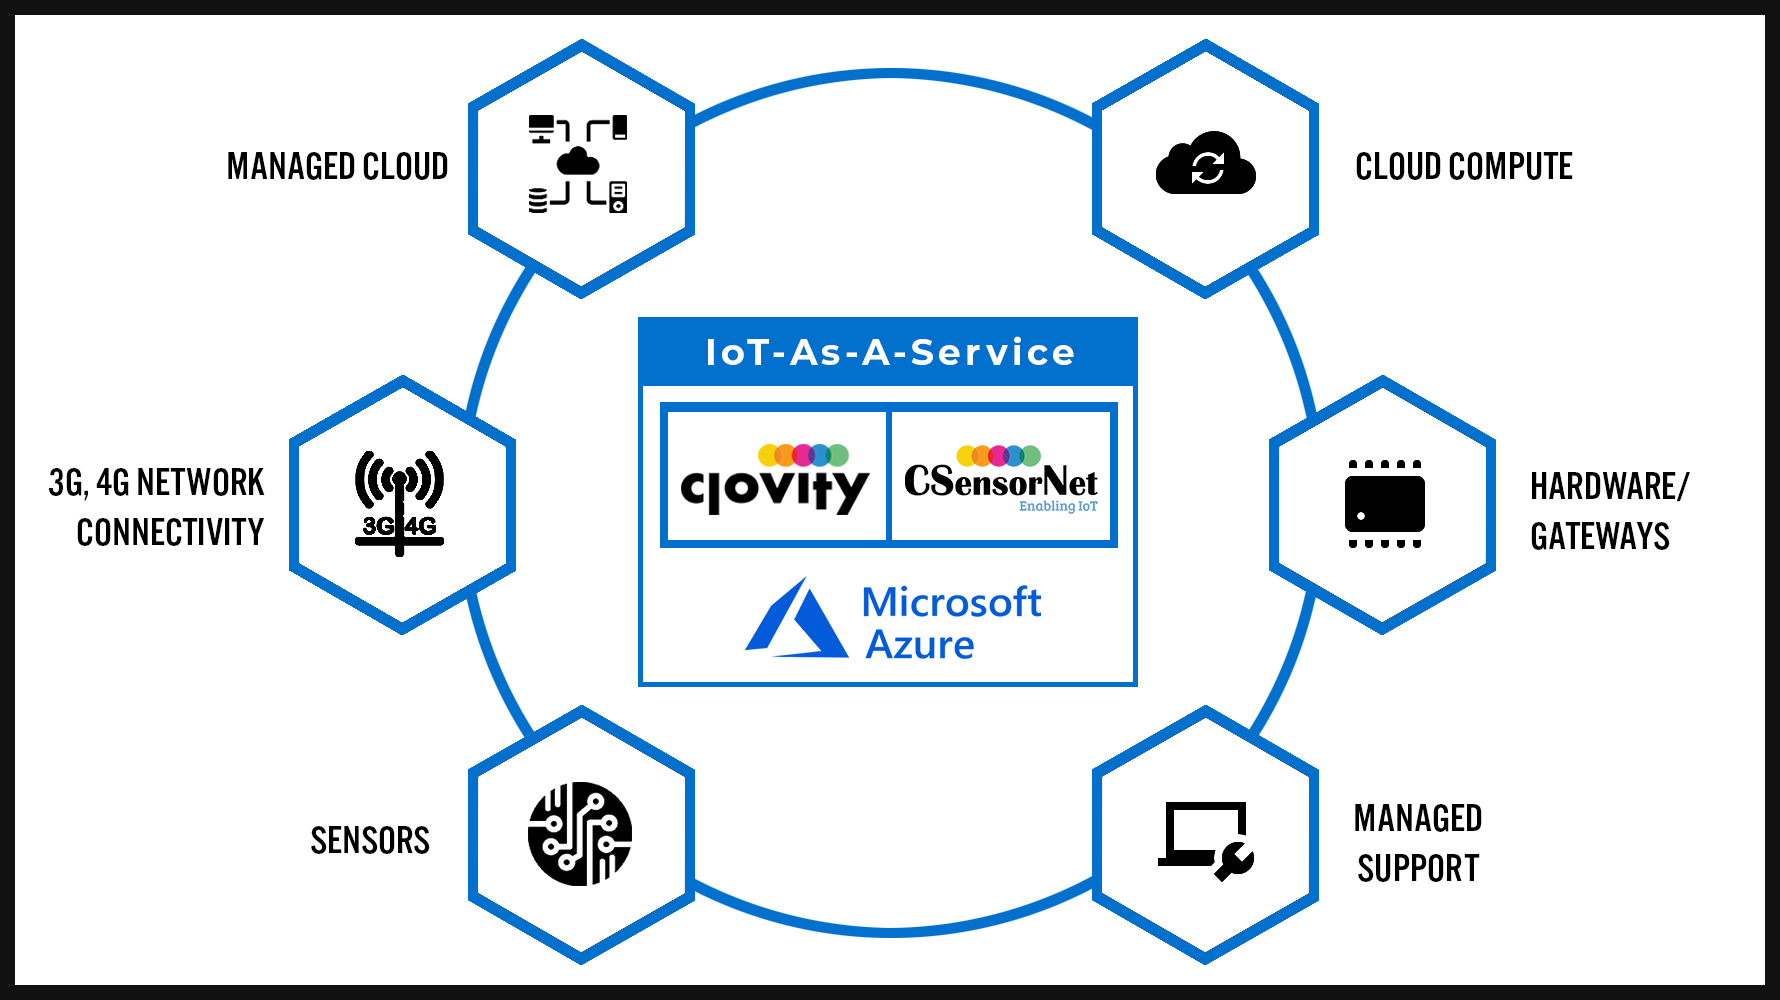 Clovity Presents IoT-As-A-Service Pricing & Vertical Industrial Hardware Bundle Solutions for the Next Release of Their CSensorNet IoT Platform